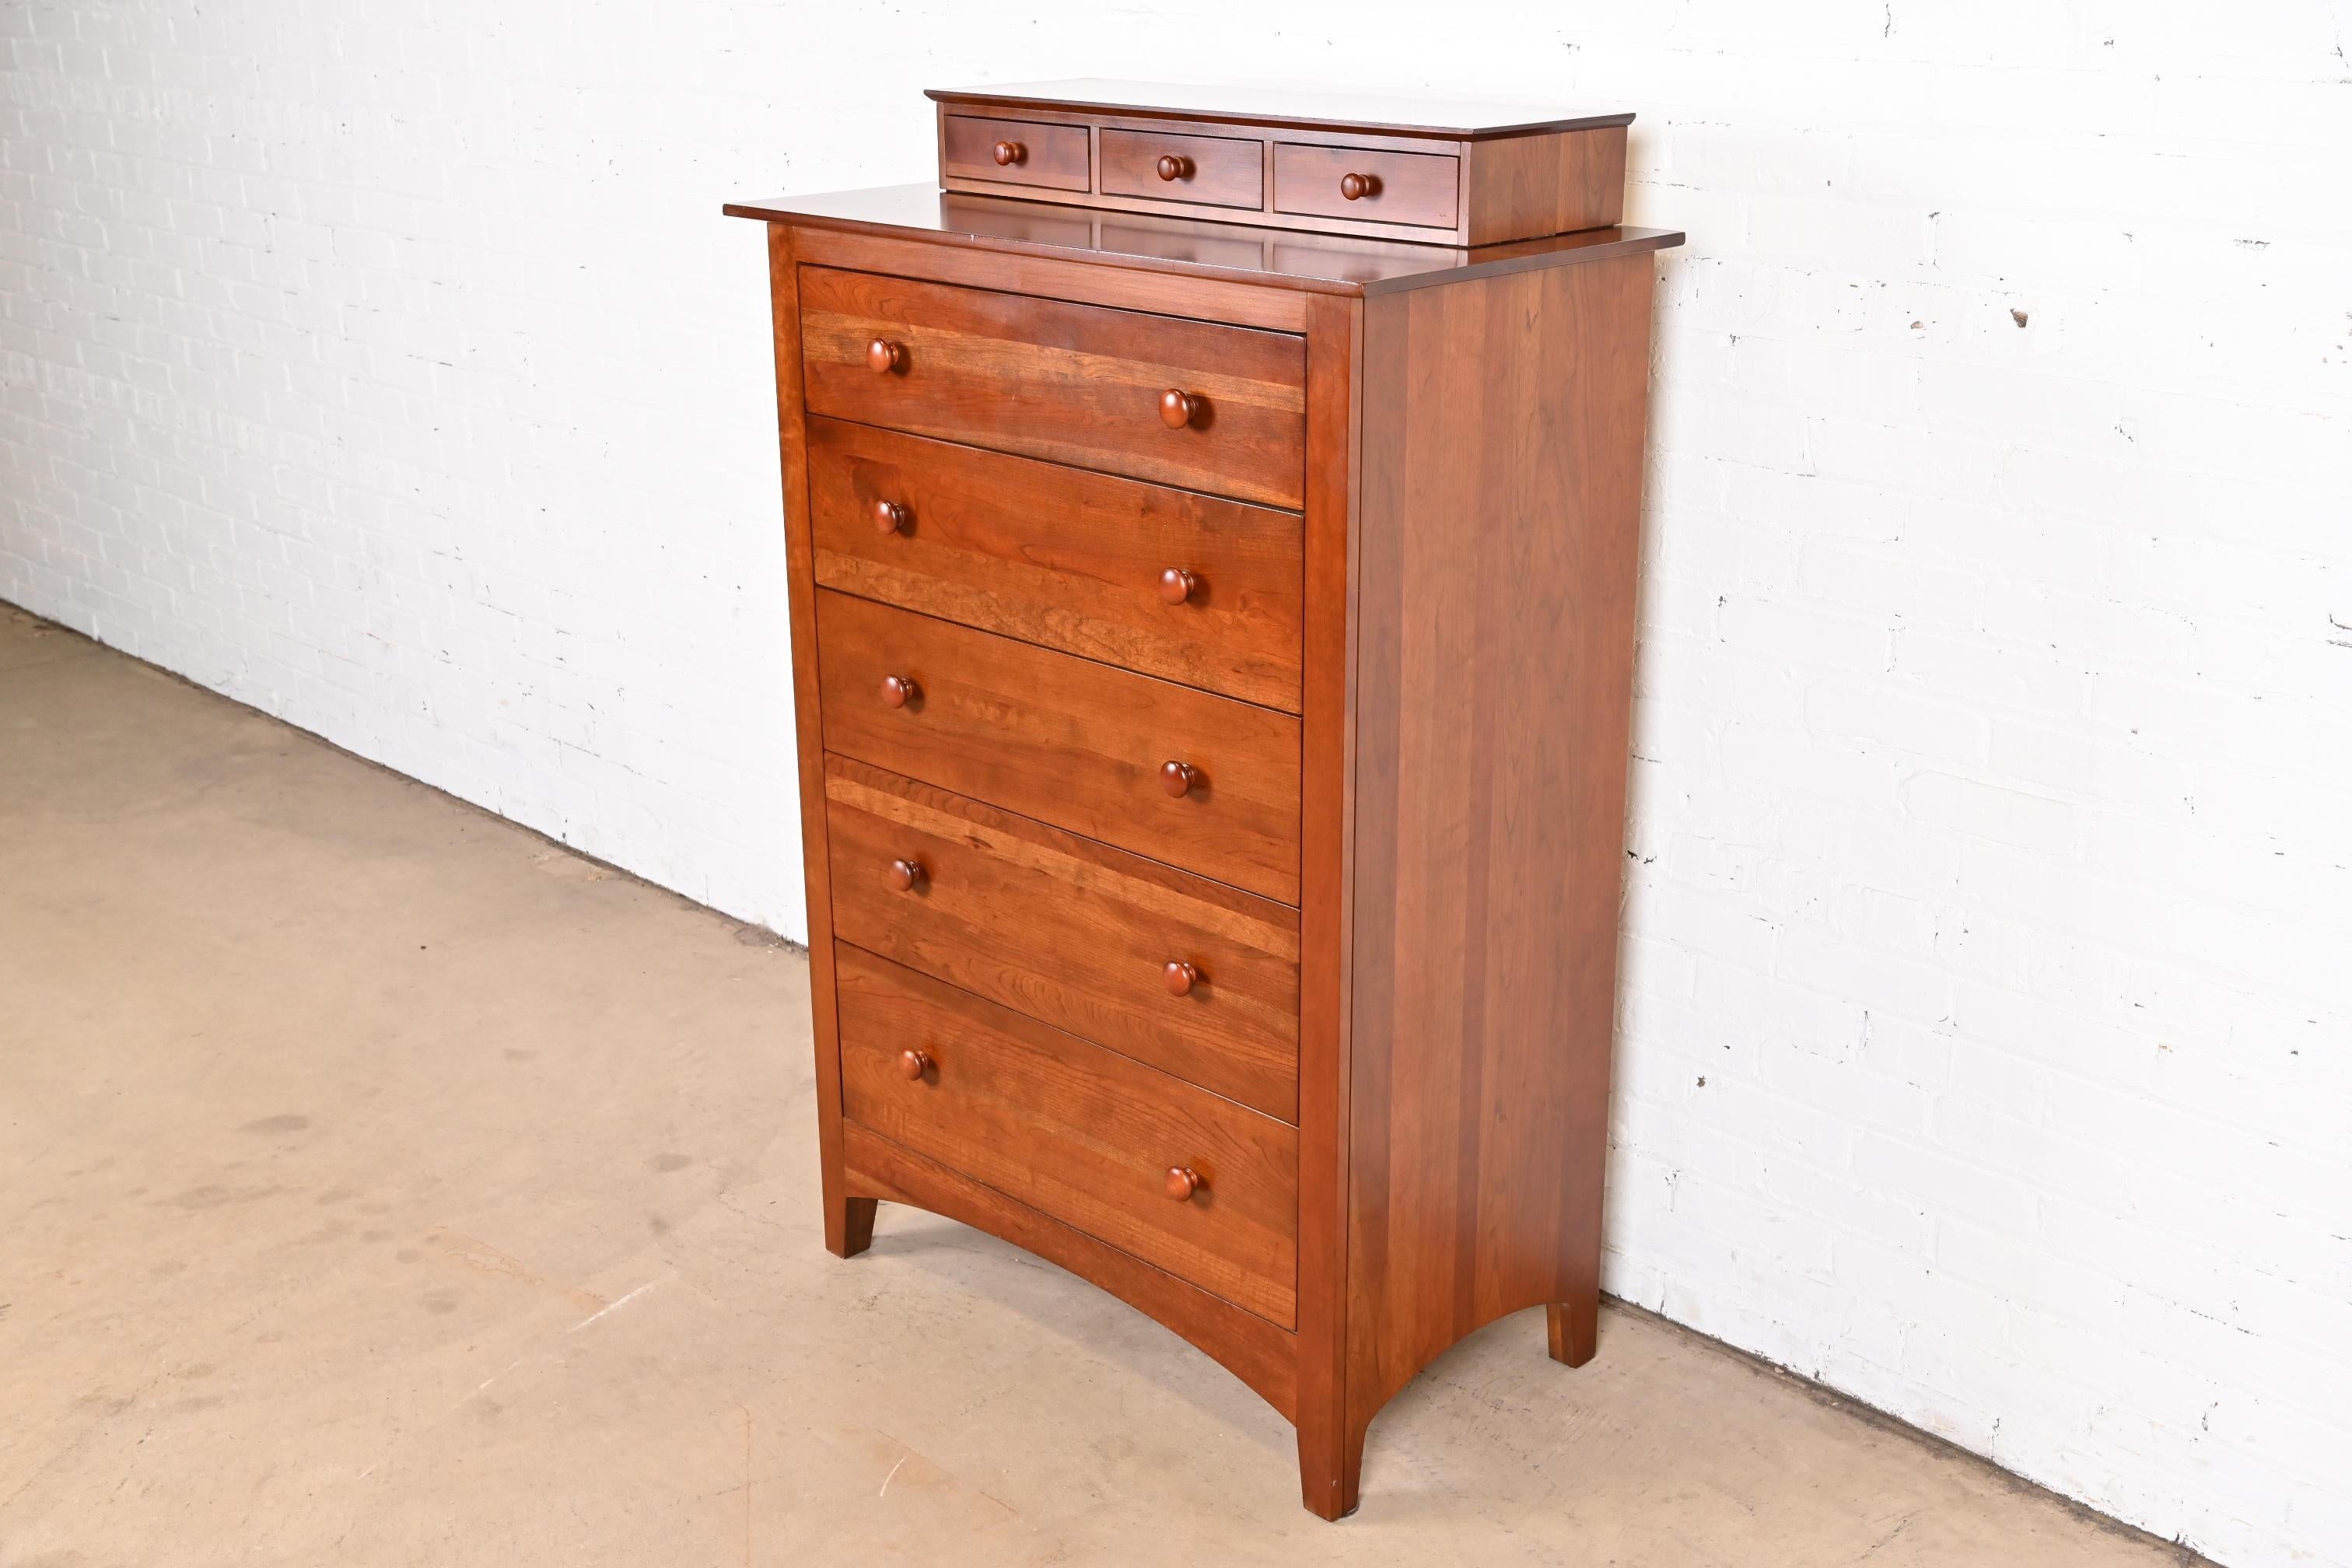 A gorgeous Mission, Arts & Crafts, or Shaker style solid cherry wood eight-drawer highboy dresser or chest of drawers

By Ethan Allen

USA, circa late 20th century

Measures: 36